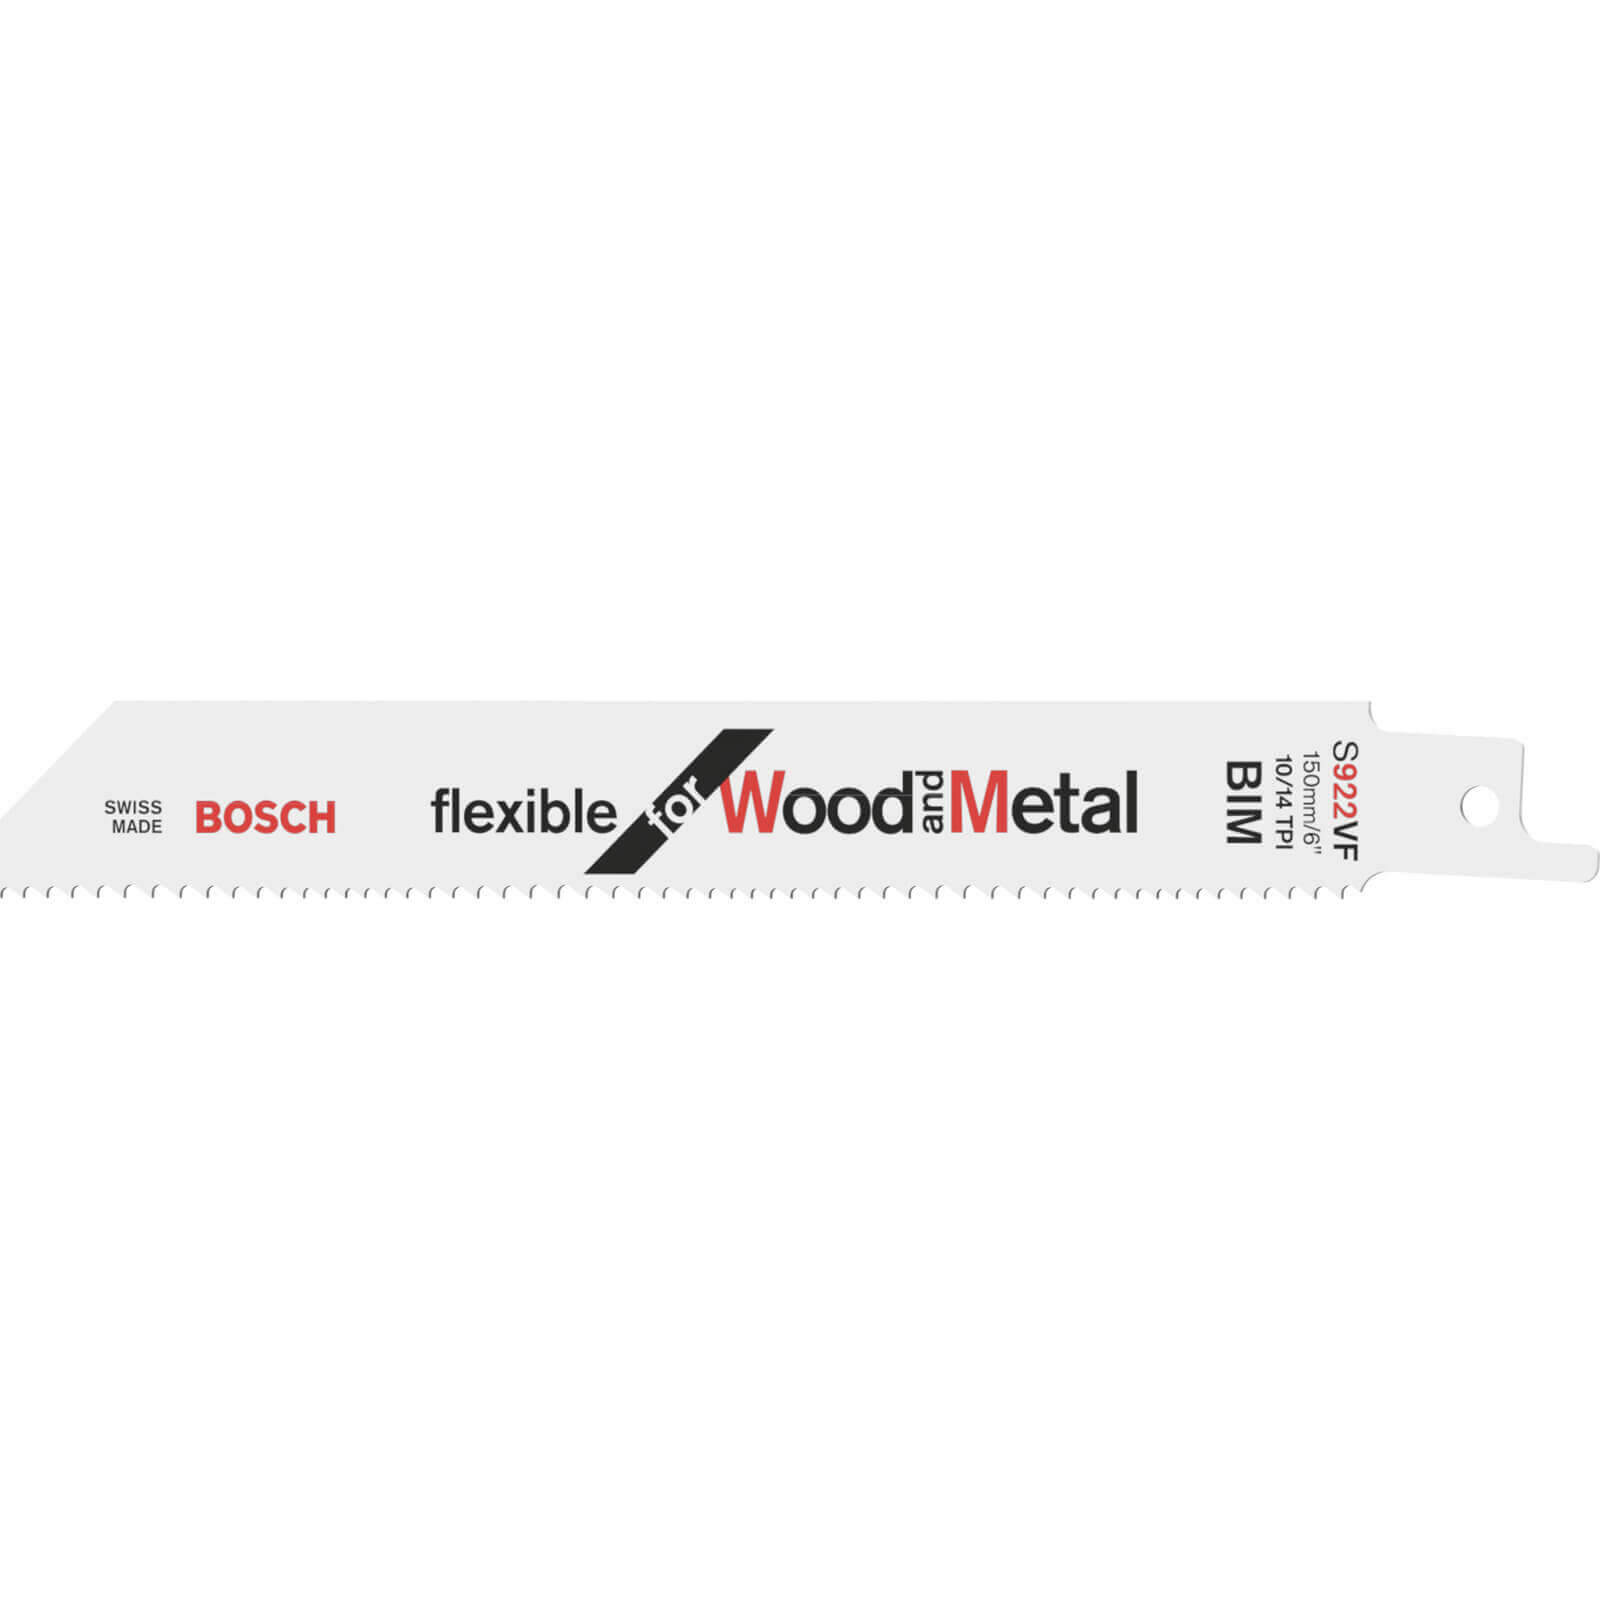 Photo of Bosch S922vf Wood And Metal Cutting Reciprocating Saw Blades Pack Of 5